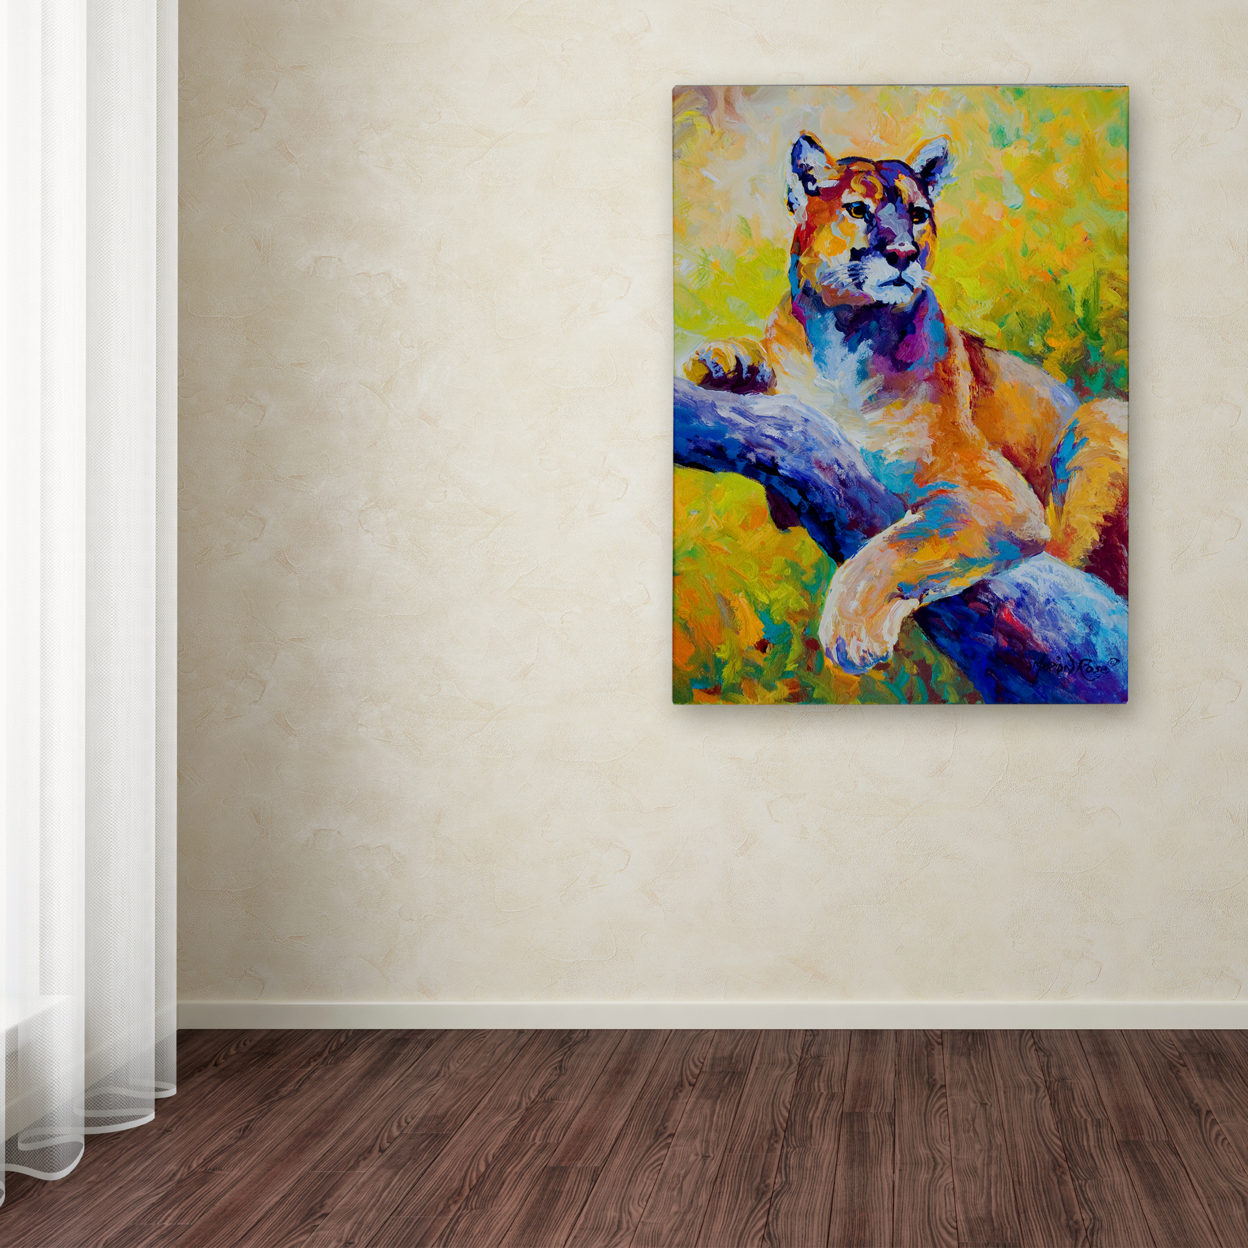 Marion Rose 'Cub' Ready To Hang Canvas Art 14 X 19 Inches Made In USA